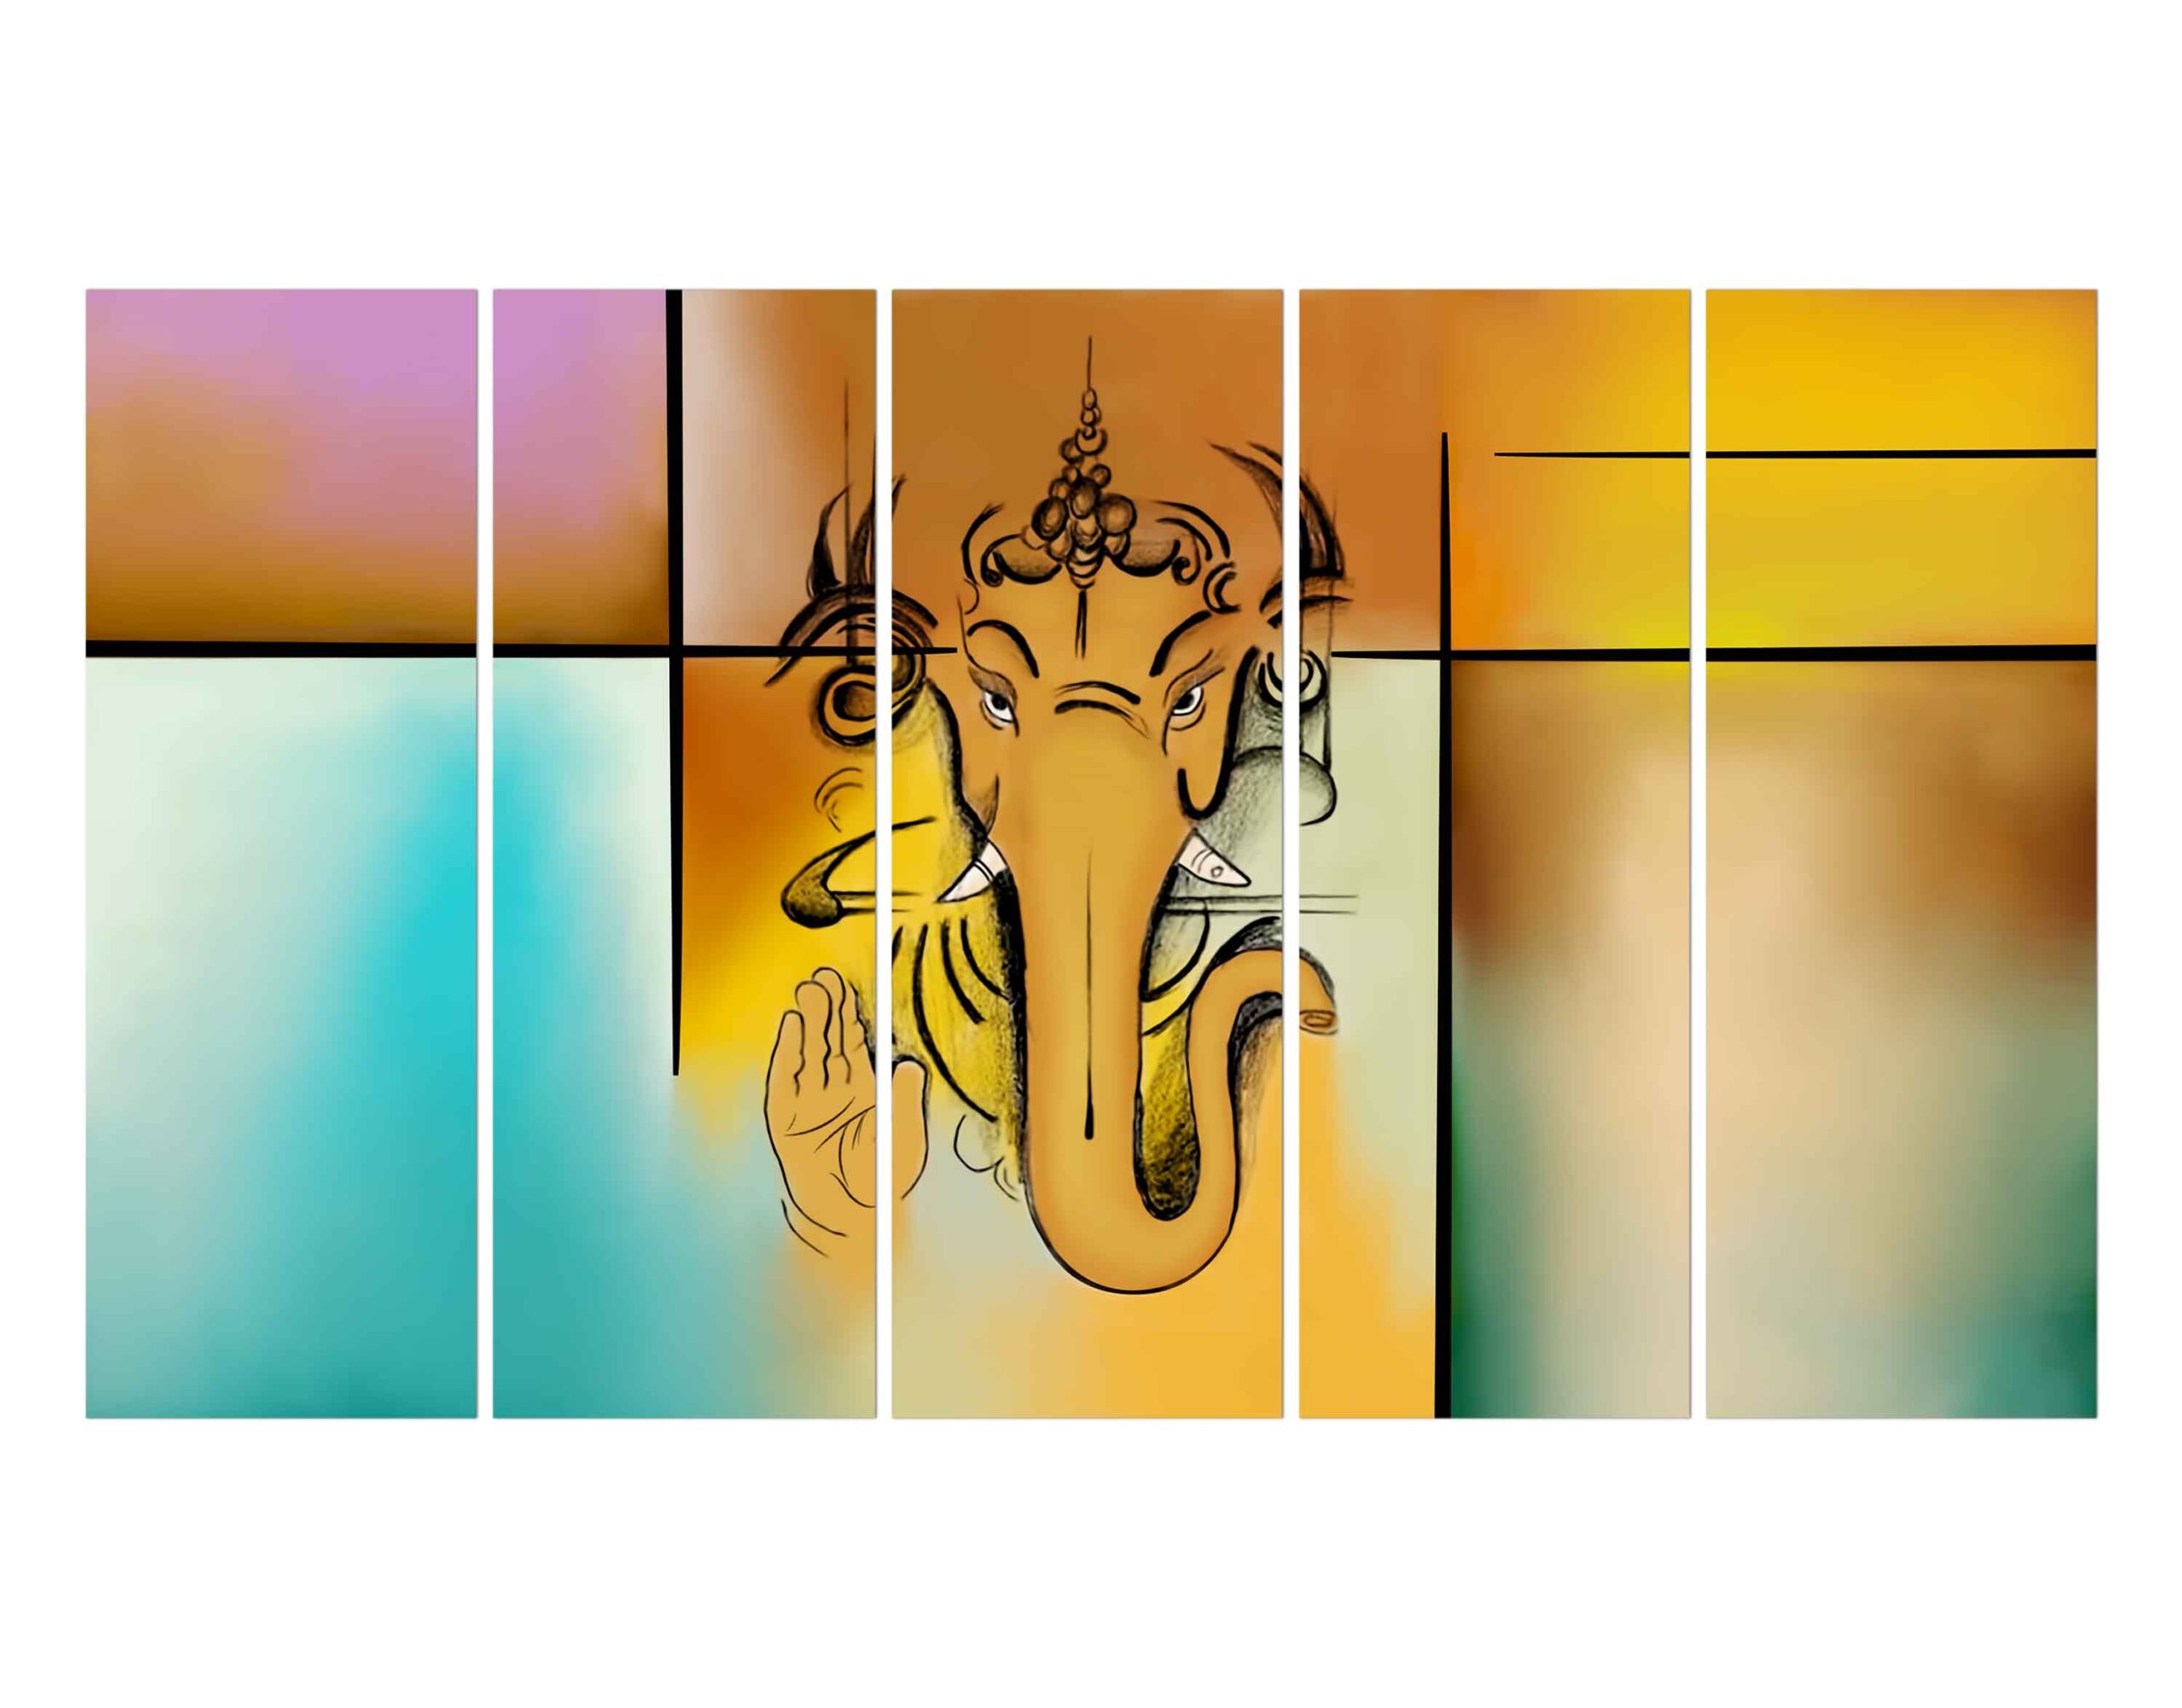 Lord Ganesha Face Illustration with Colorful Background Wall Digital Print